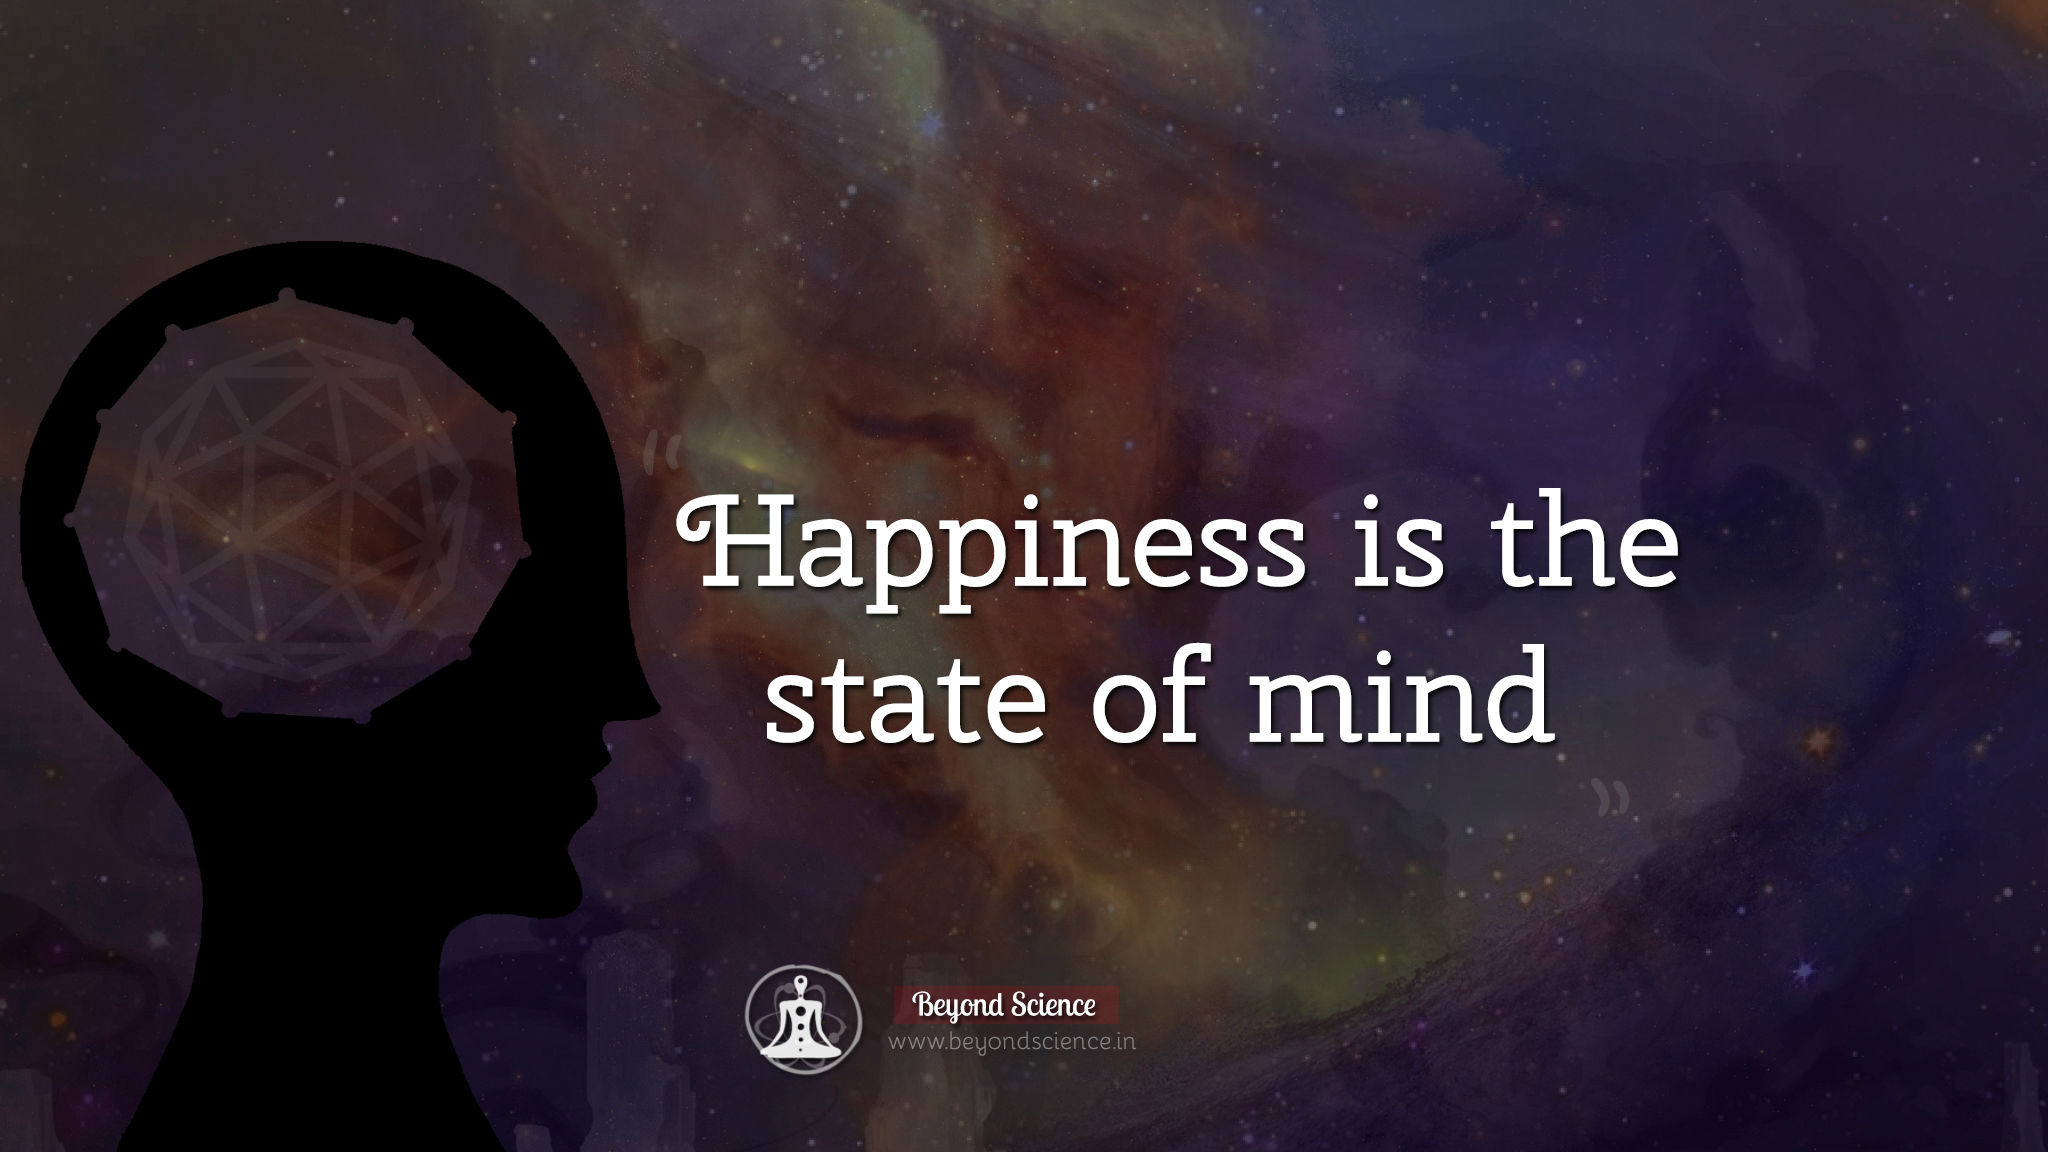 Happiness is the state of mind